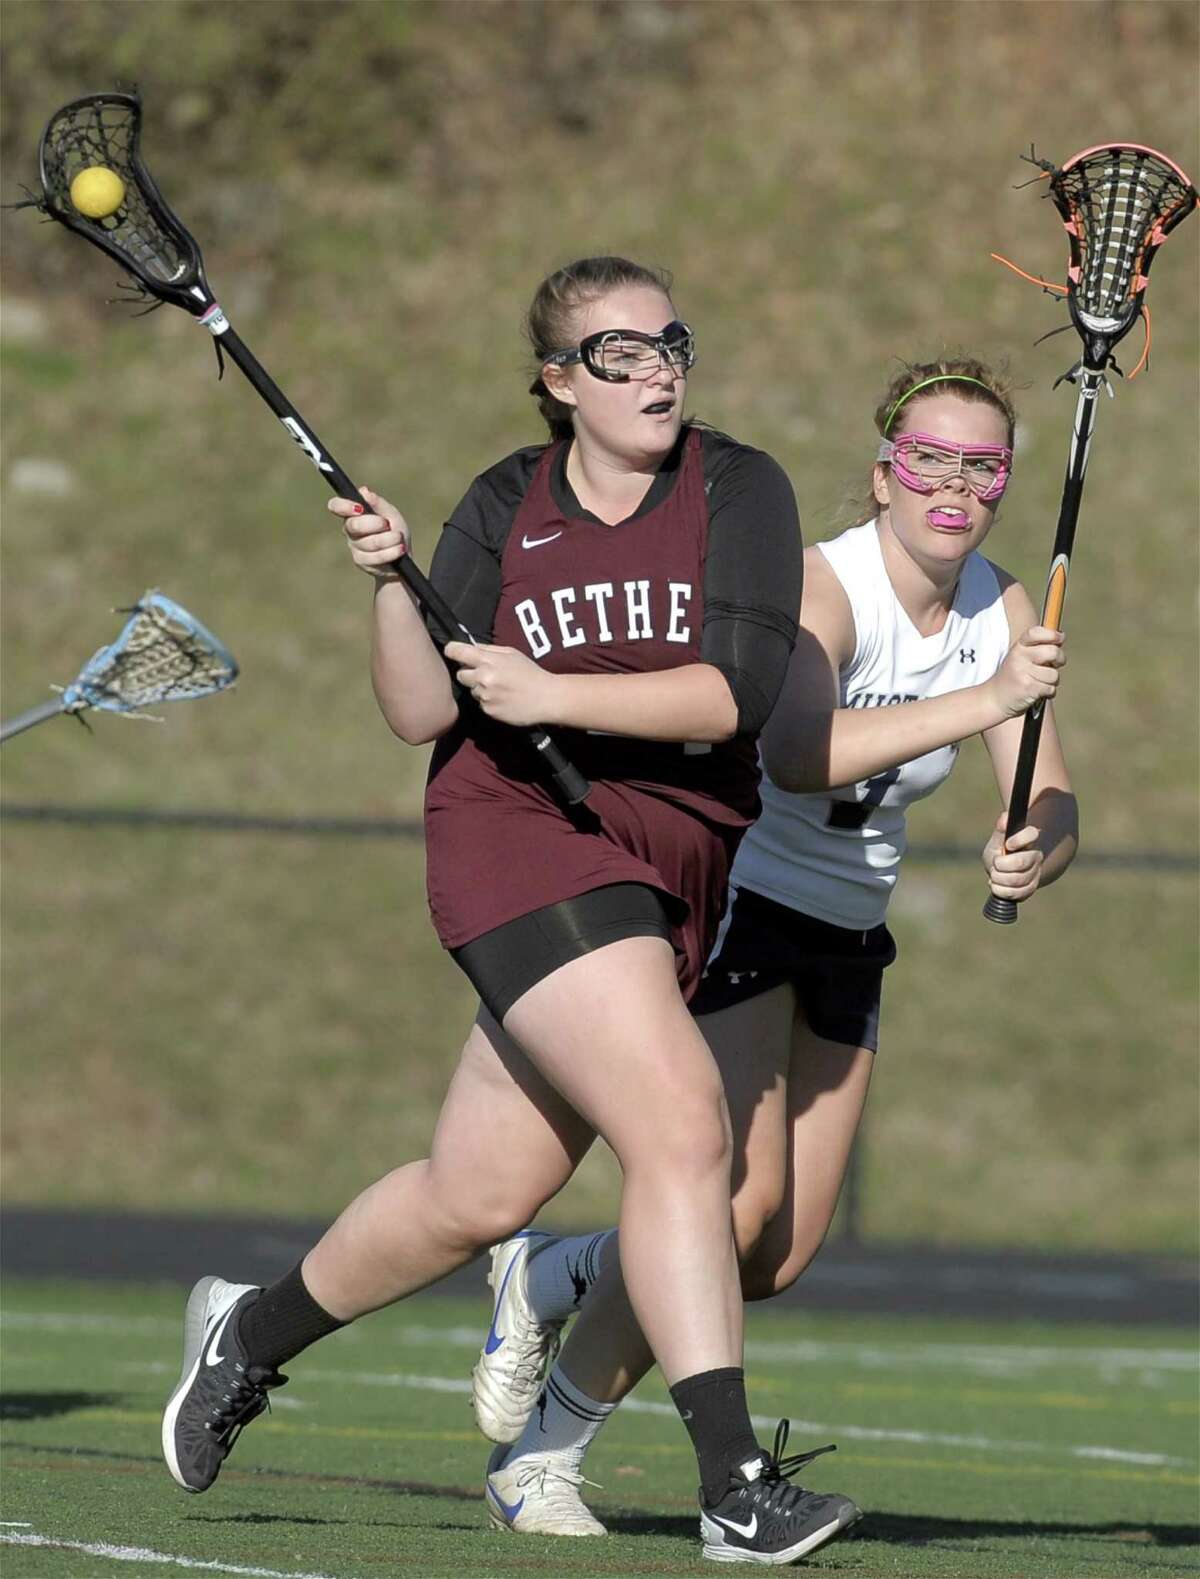 FILE PHOTO: Bethel's Sarah Melvin (24) heads towards the goal while being defended by Immaculate's Brianna Sullivan (1) in the girls high school lacrosse game between Bethel and Immaculate high schools on Tuesday, April 28, 2015, played at Immaculate High School, in Danbury, Conn.